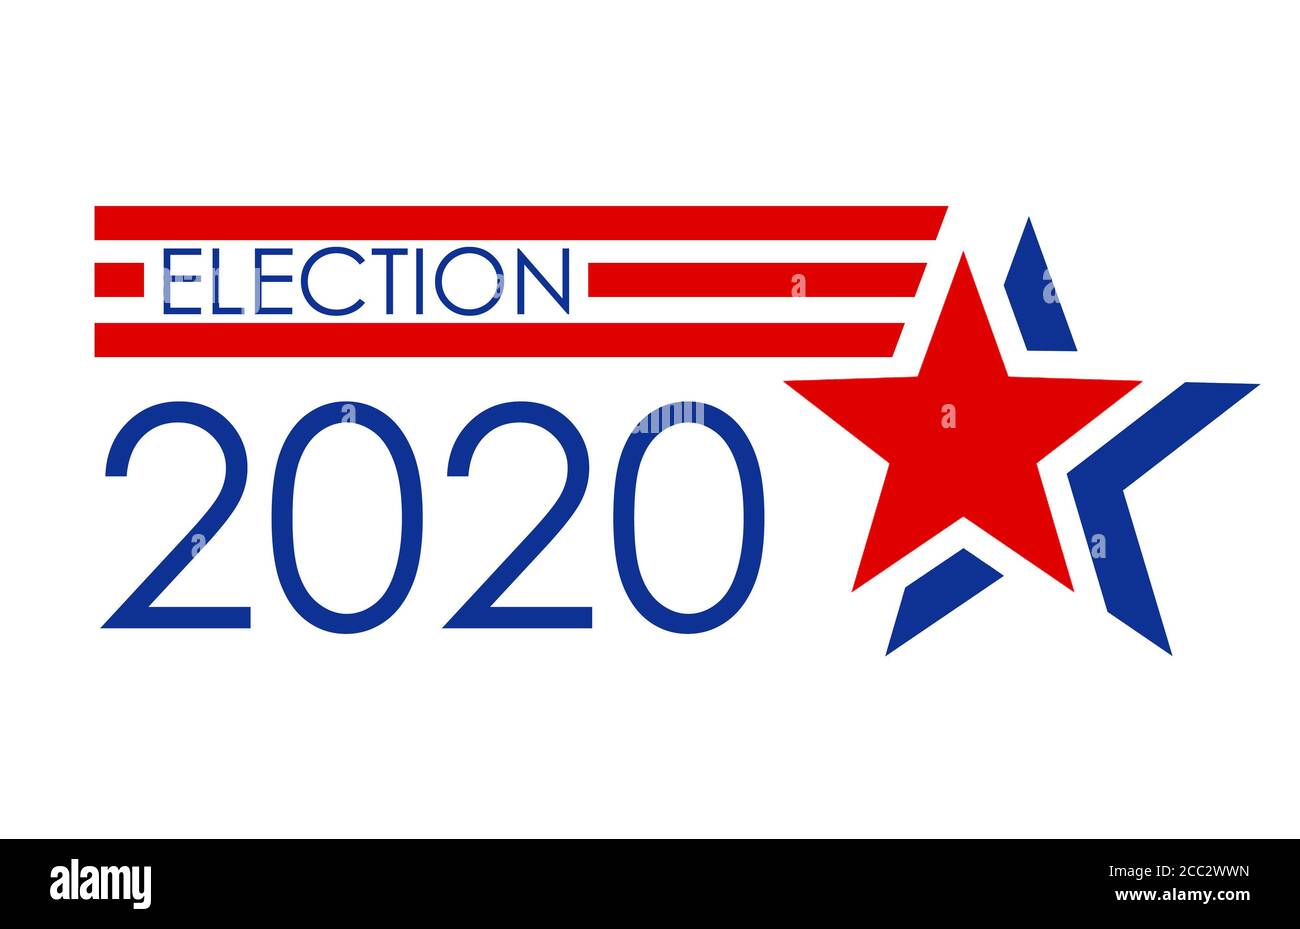 Presidential Election 2020 in the United States of America Stock Photo